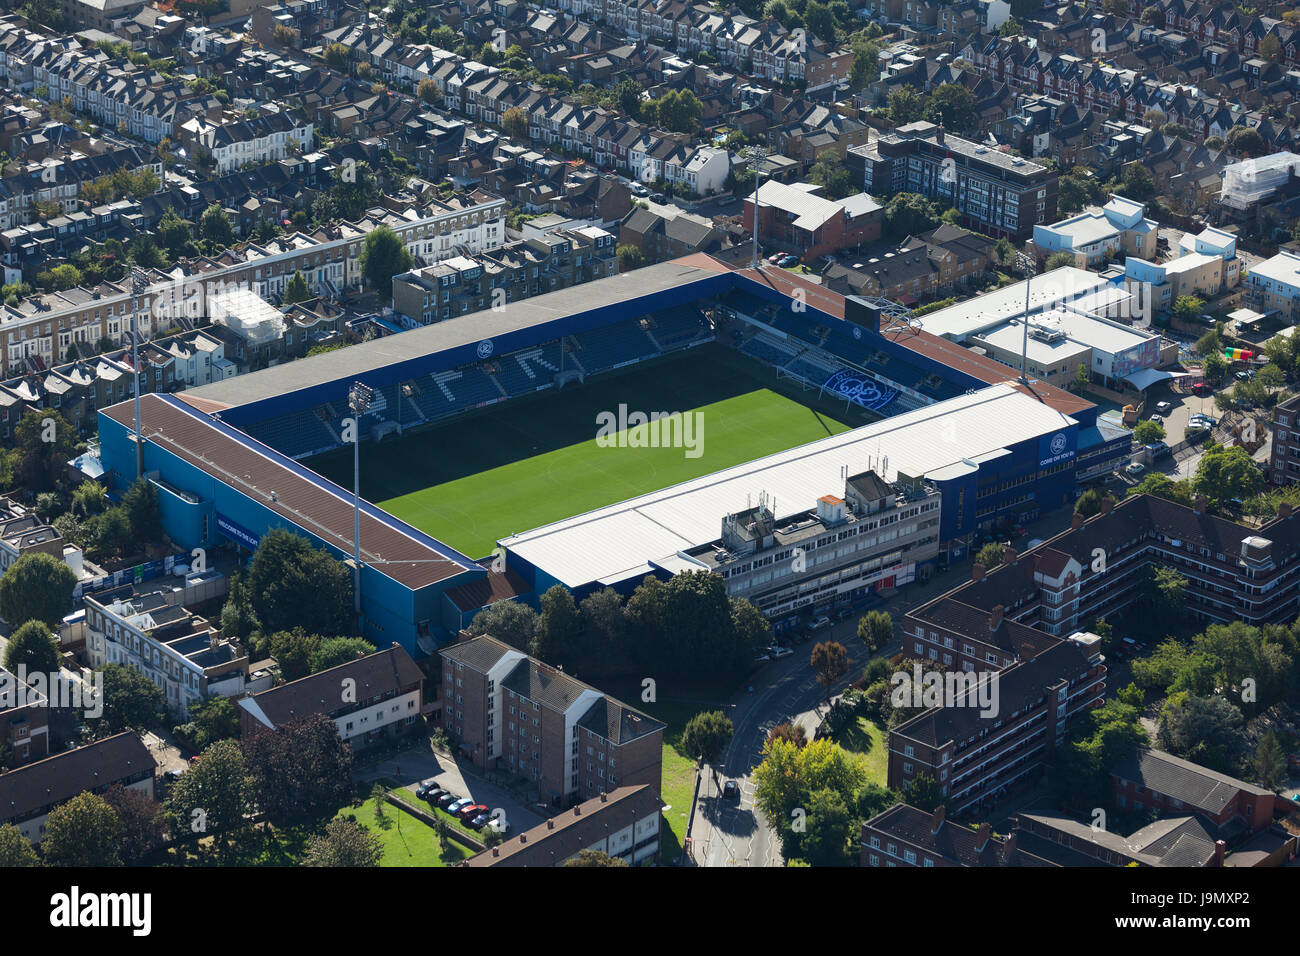 Queens Park Rangers Football Club, Loftus Road, White City, London. QPR play in the Sky Bet Championship Stock Photo